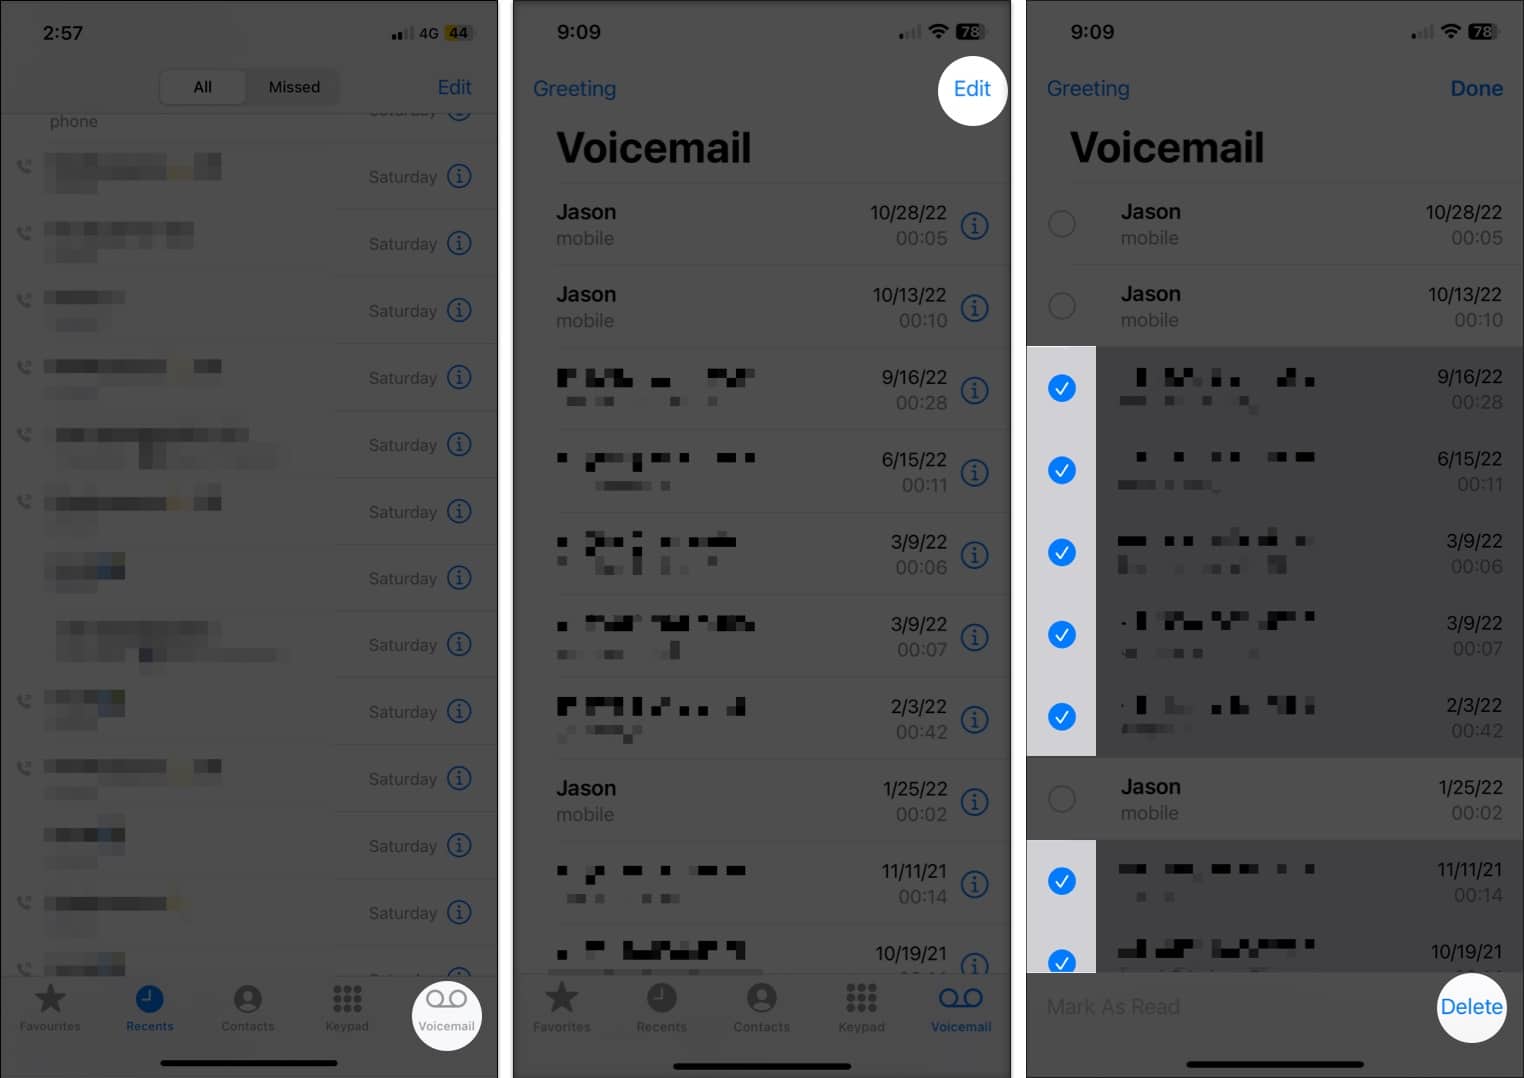 How to delete multiple voicemails on iPhone